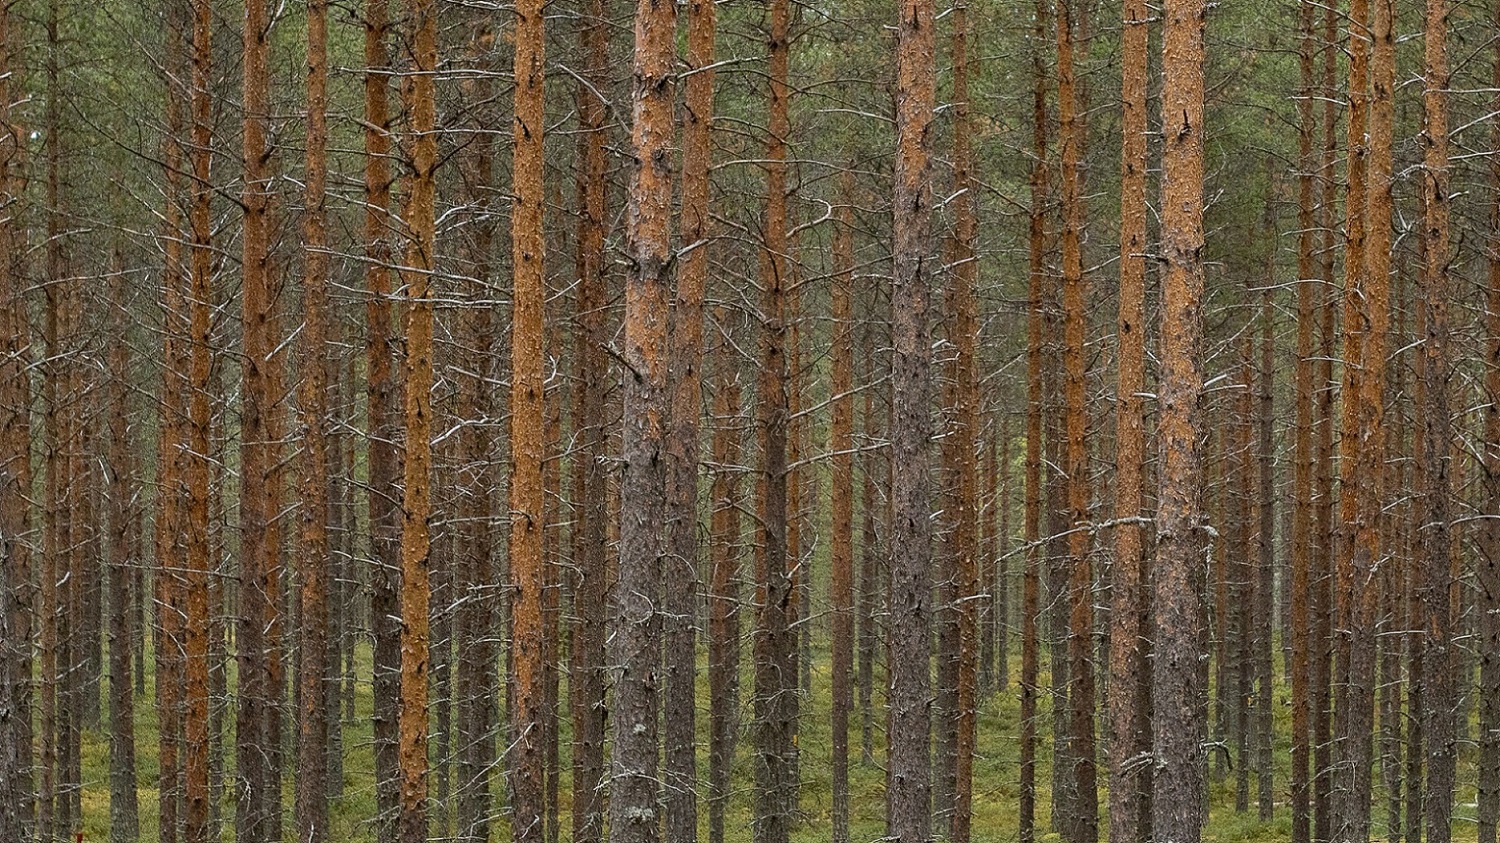 A row of pine trees in the forest.